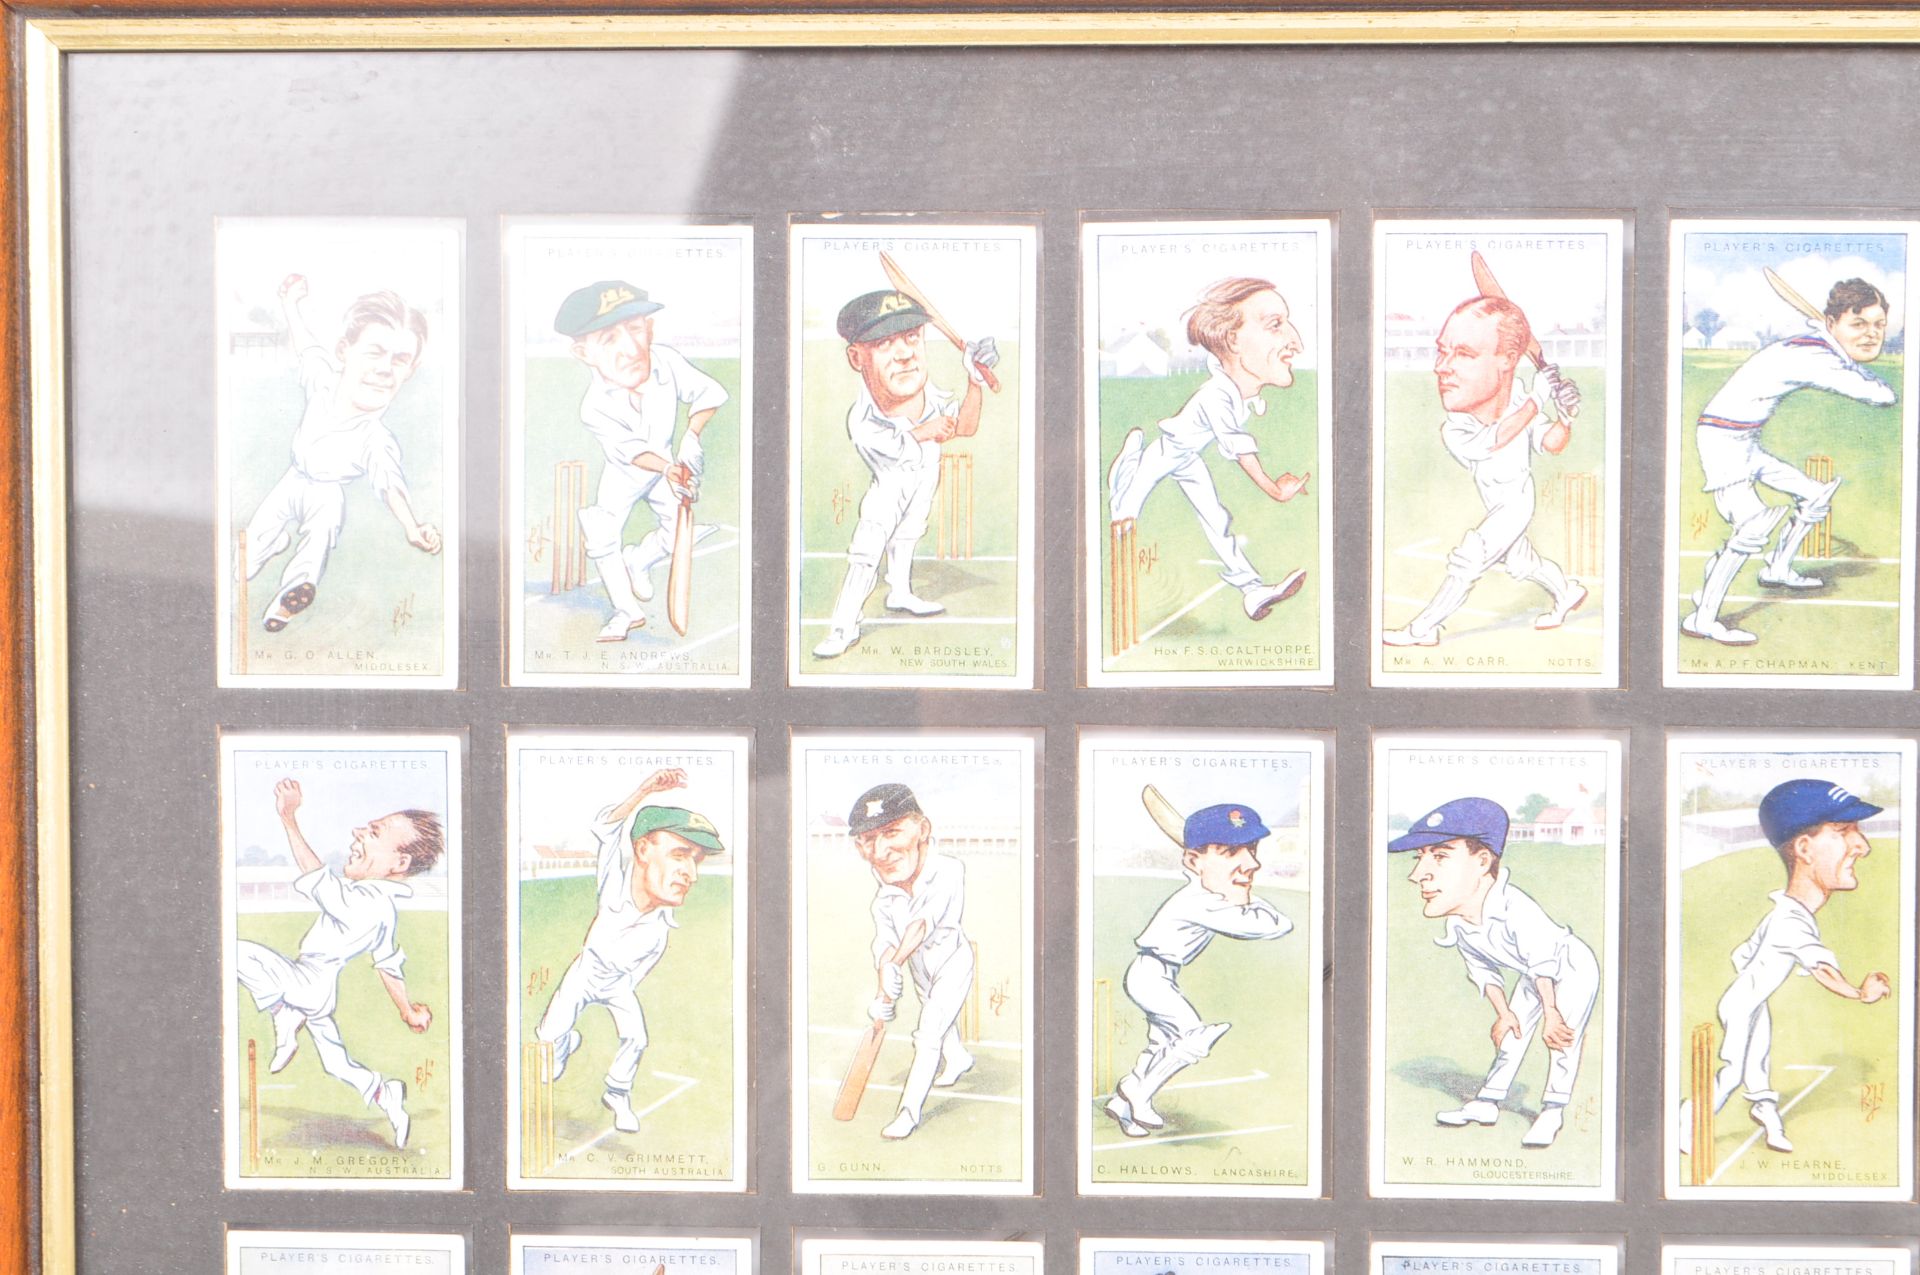 PLAYERS CIGARETTES - COLLECTION OF CRICKET CIGARETTE CARDS - Image 2 of 8